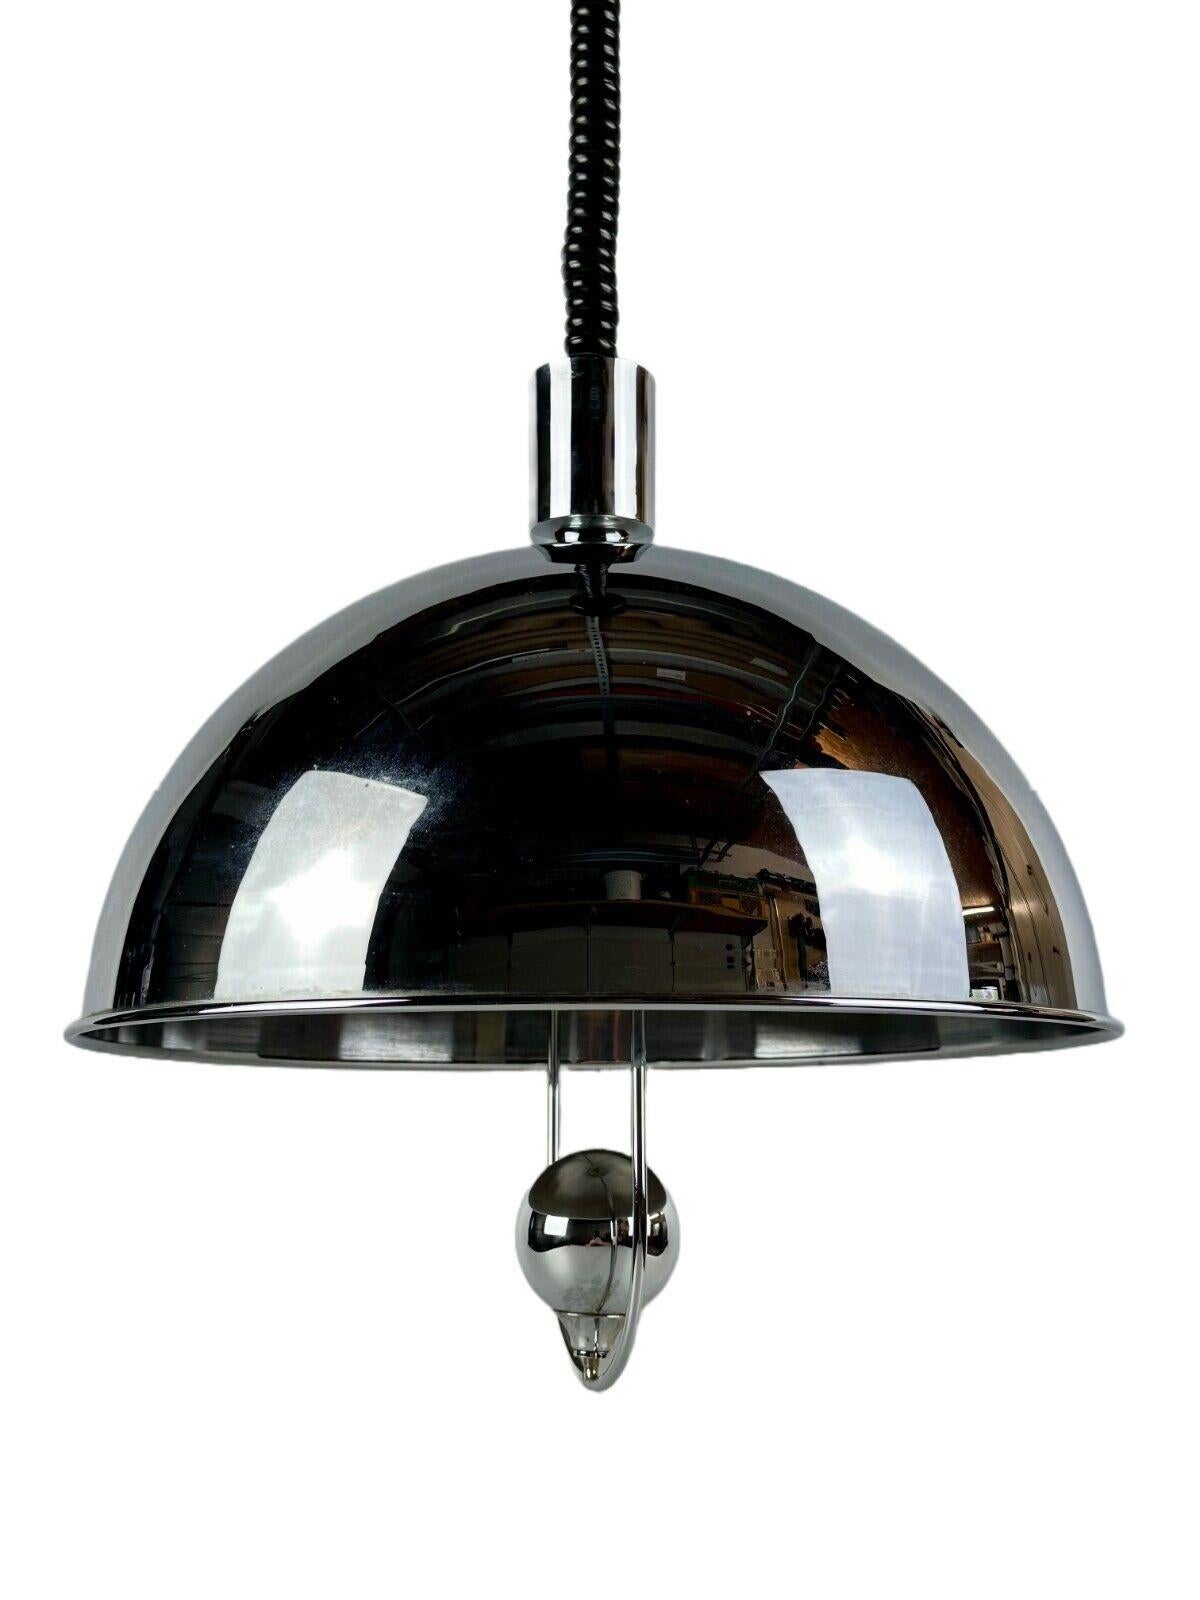 60s 70s ceiling lamp hanging lamp Florian Schulz P58 brass Space Age

Object: ceiling lamp

Manufacturer: Florian Schulz

Condition: good - vintage

Age: around 1960-1970

Dimensions:

Diameter = 37.5cm
Height = 37.5cm

Material: brass,